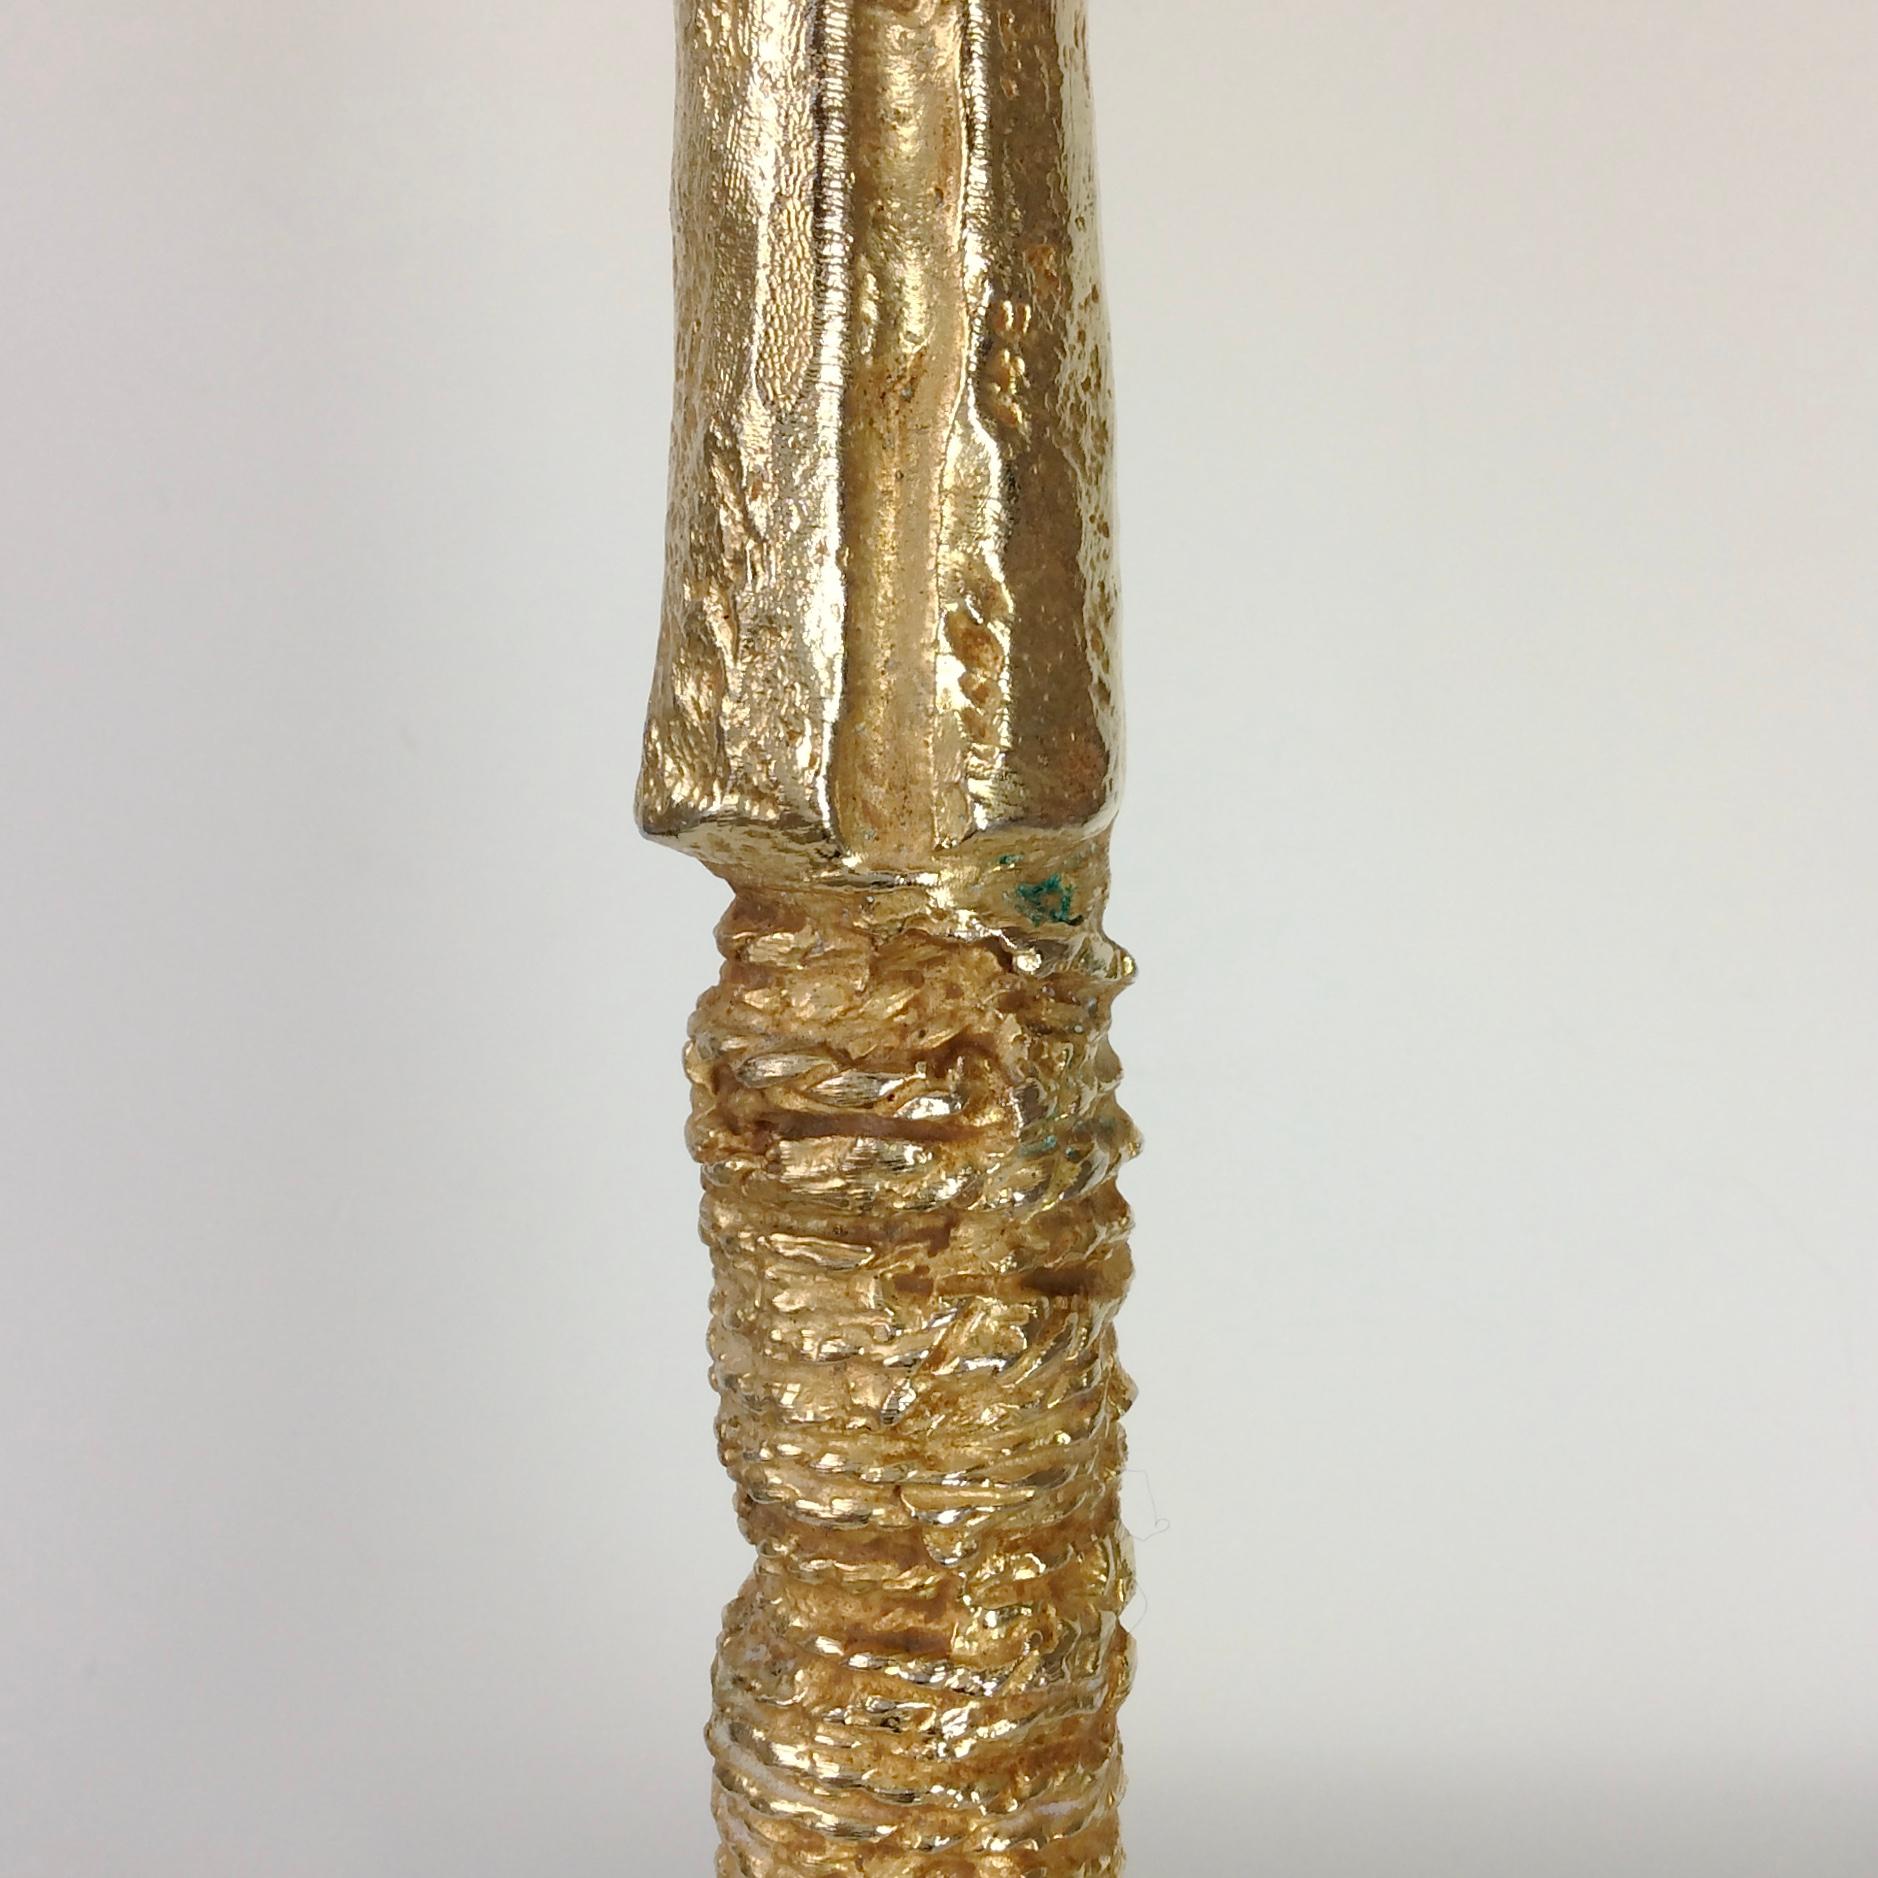 Bronze Table Lamp by Pierre Casenove for Fondica, circa 1990, France For Sale 6